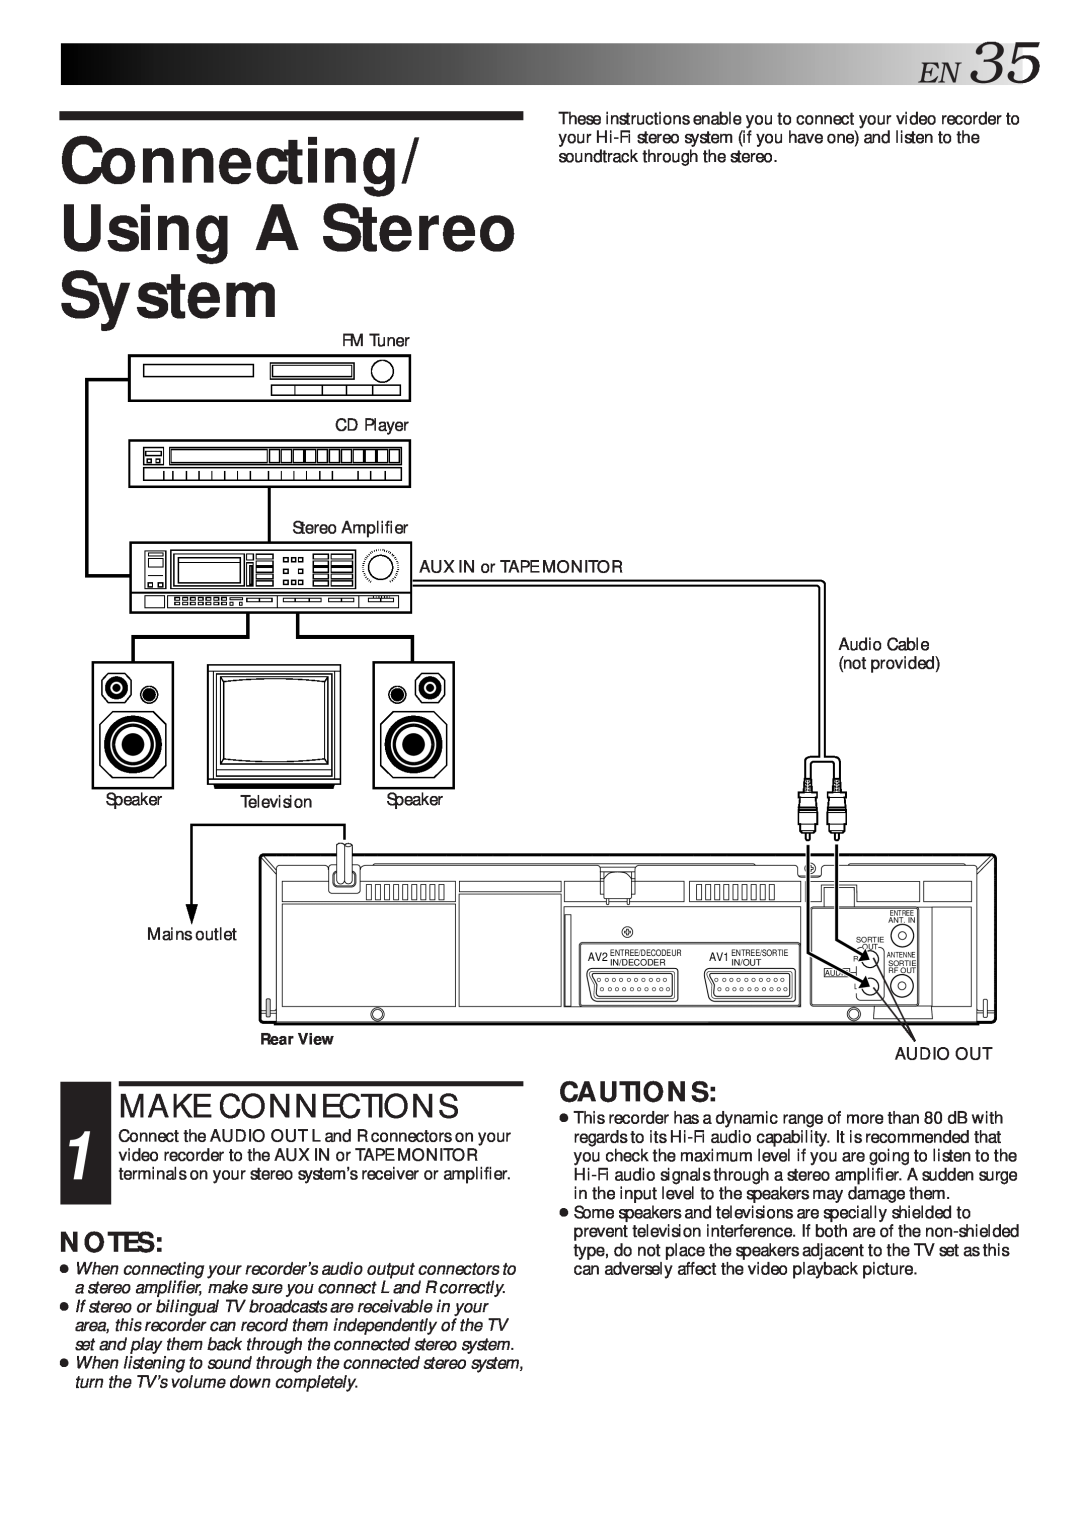 JVC HR-J713EU, HR-J712EU specifications Connecting Using A Stereo System, EN35, Cautions, Make Connections 